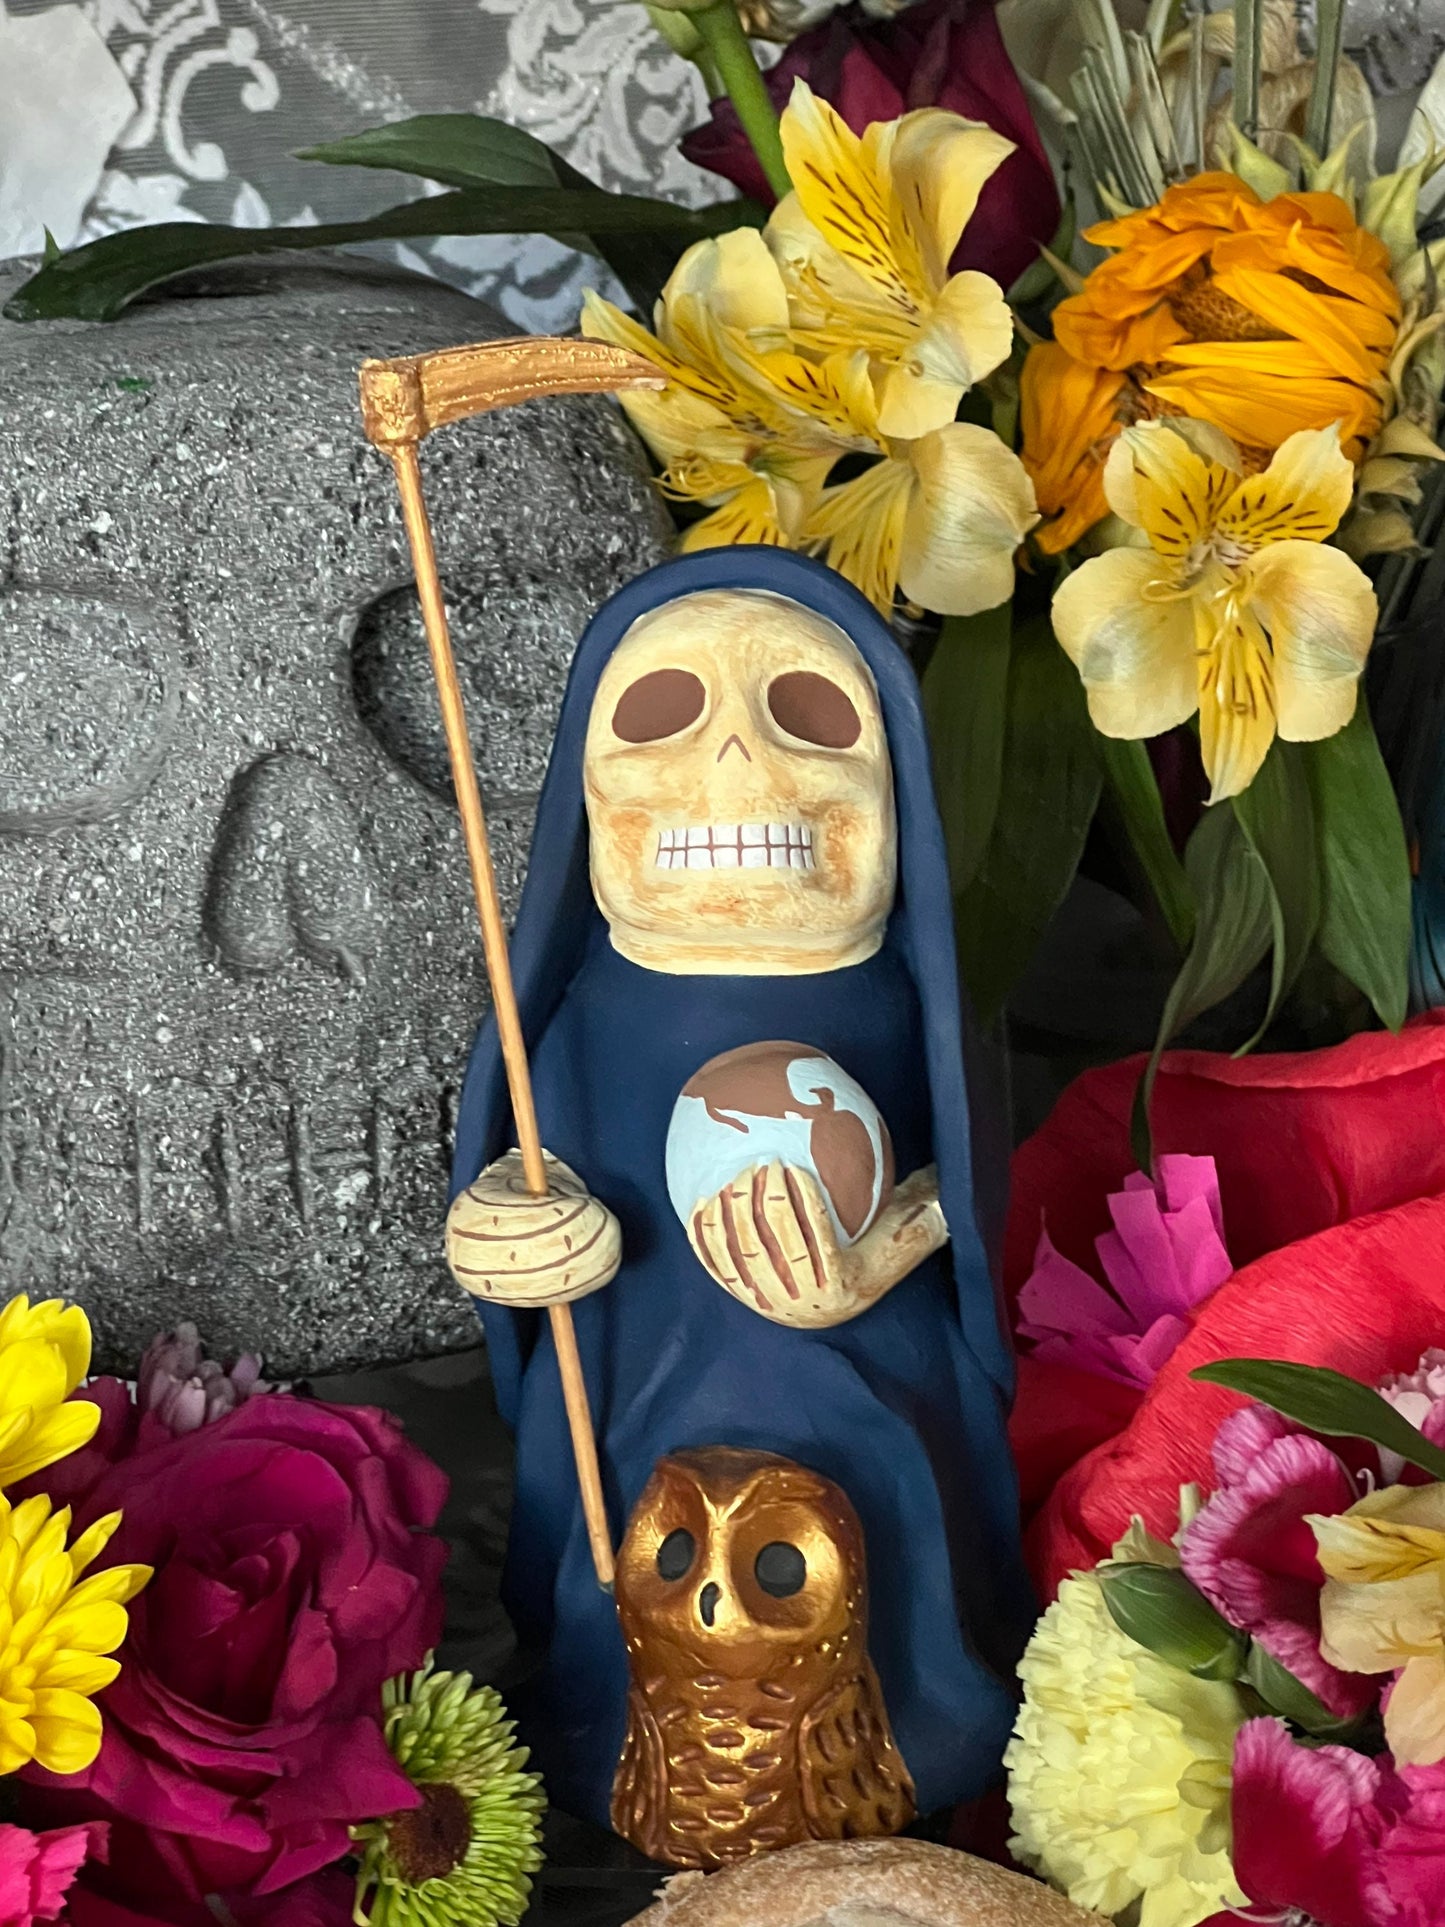 Santa Muerte Azul Statue + Blue + Mictecacihuatl + Mictlantecihuatl + Traditionally Handcrafted from Mexican Clay + One of a Kind